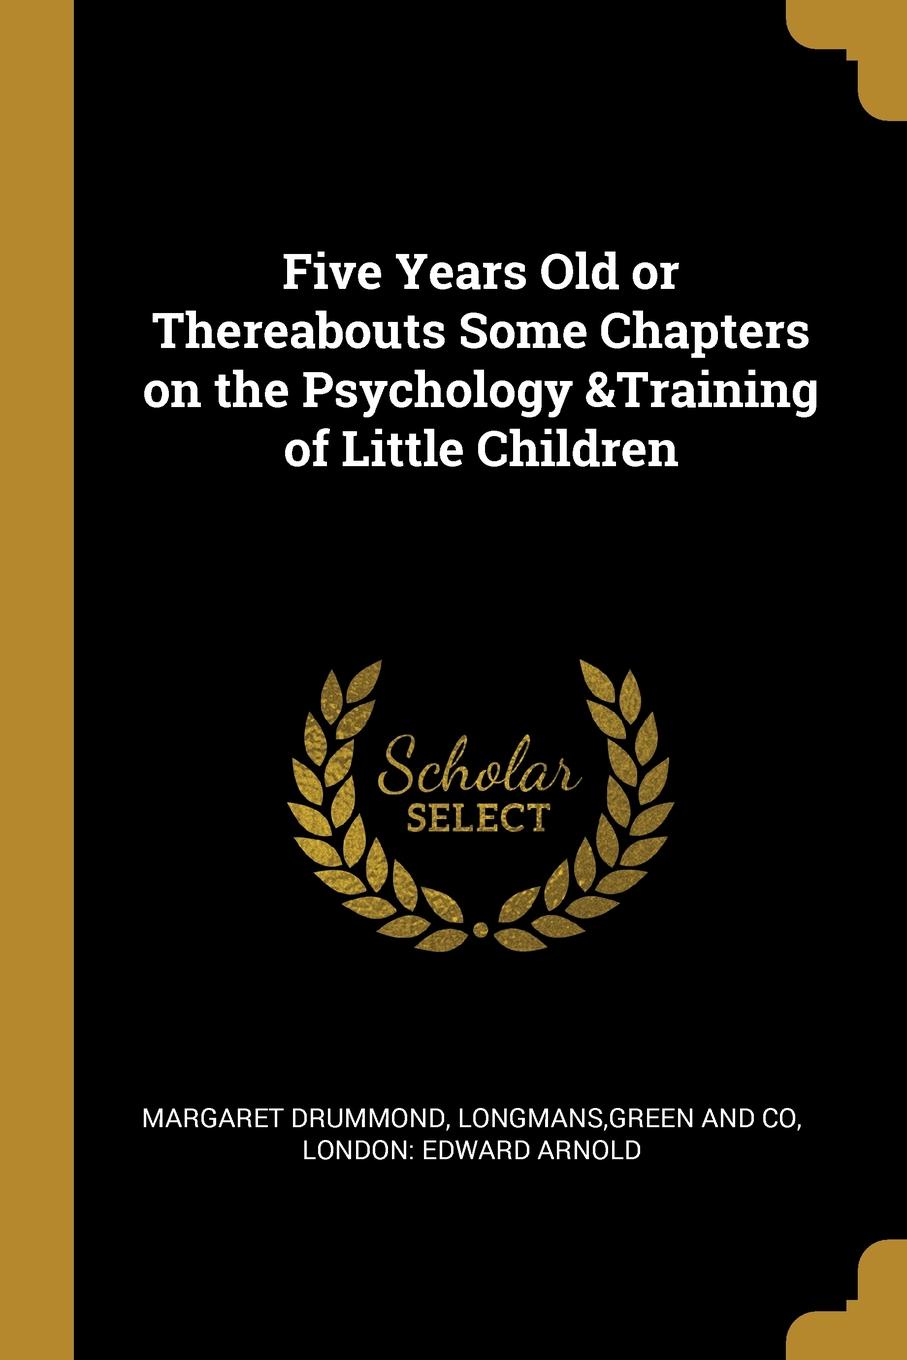 Five Years Old or Thereabouts Some Chapters on the Psychology .Training of Little Children